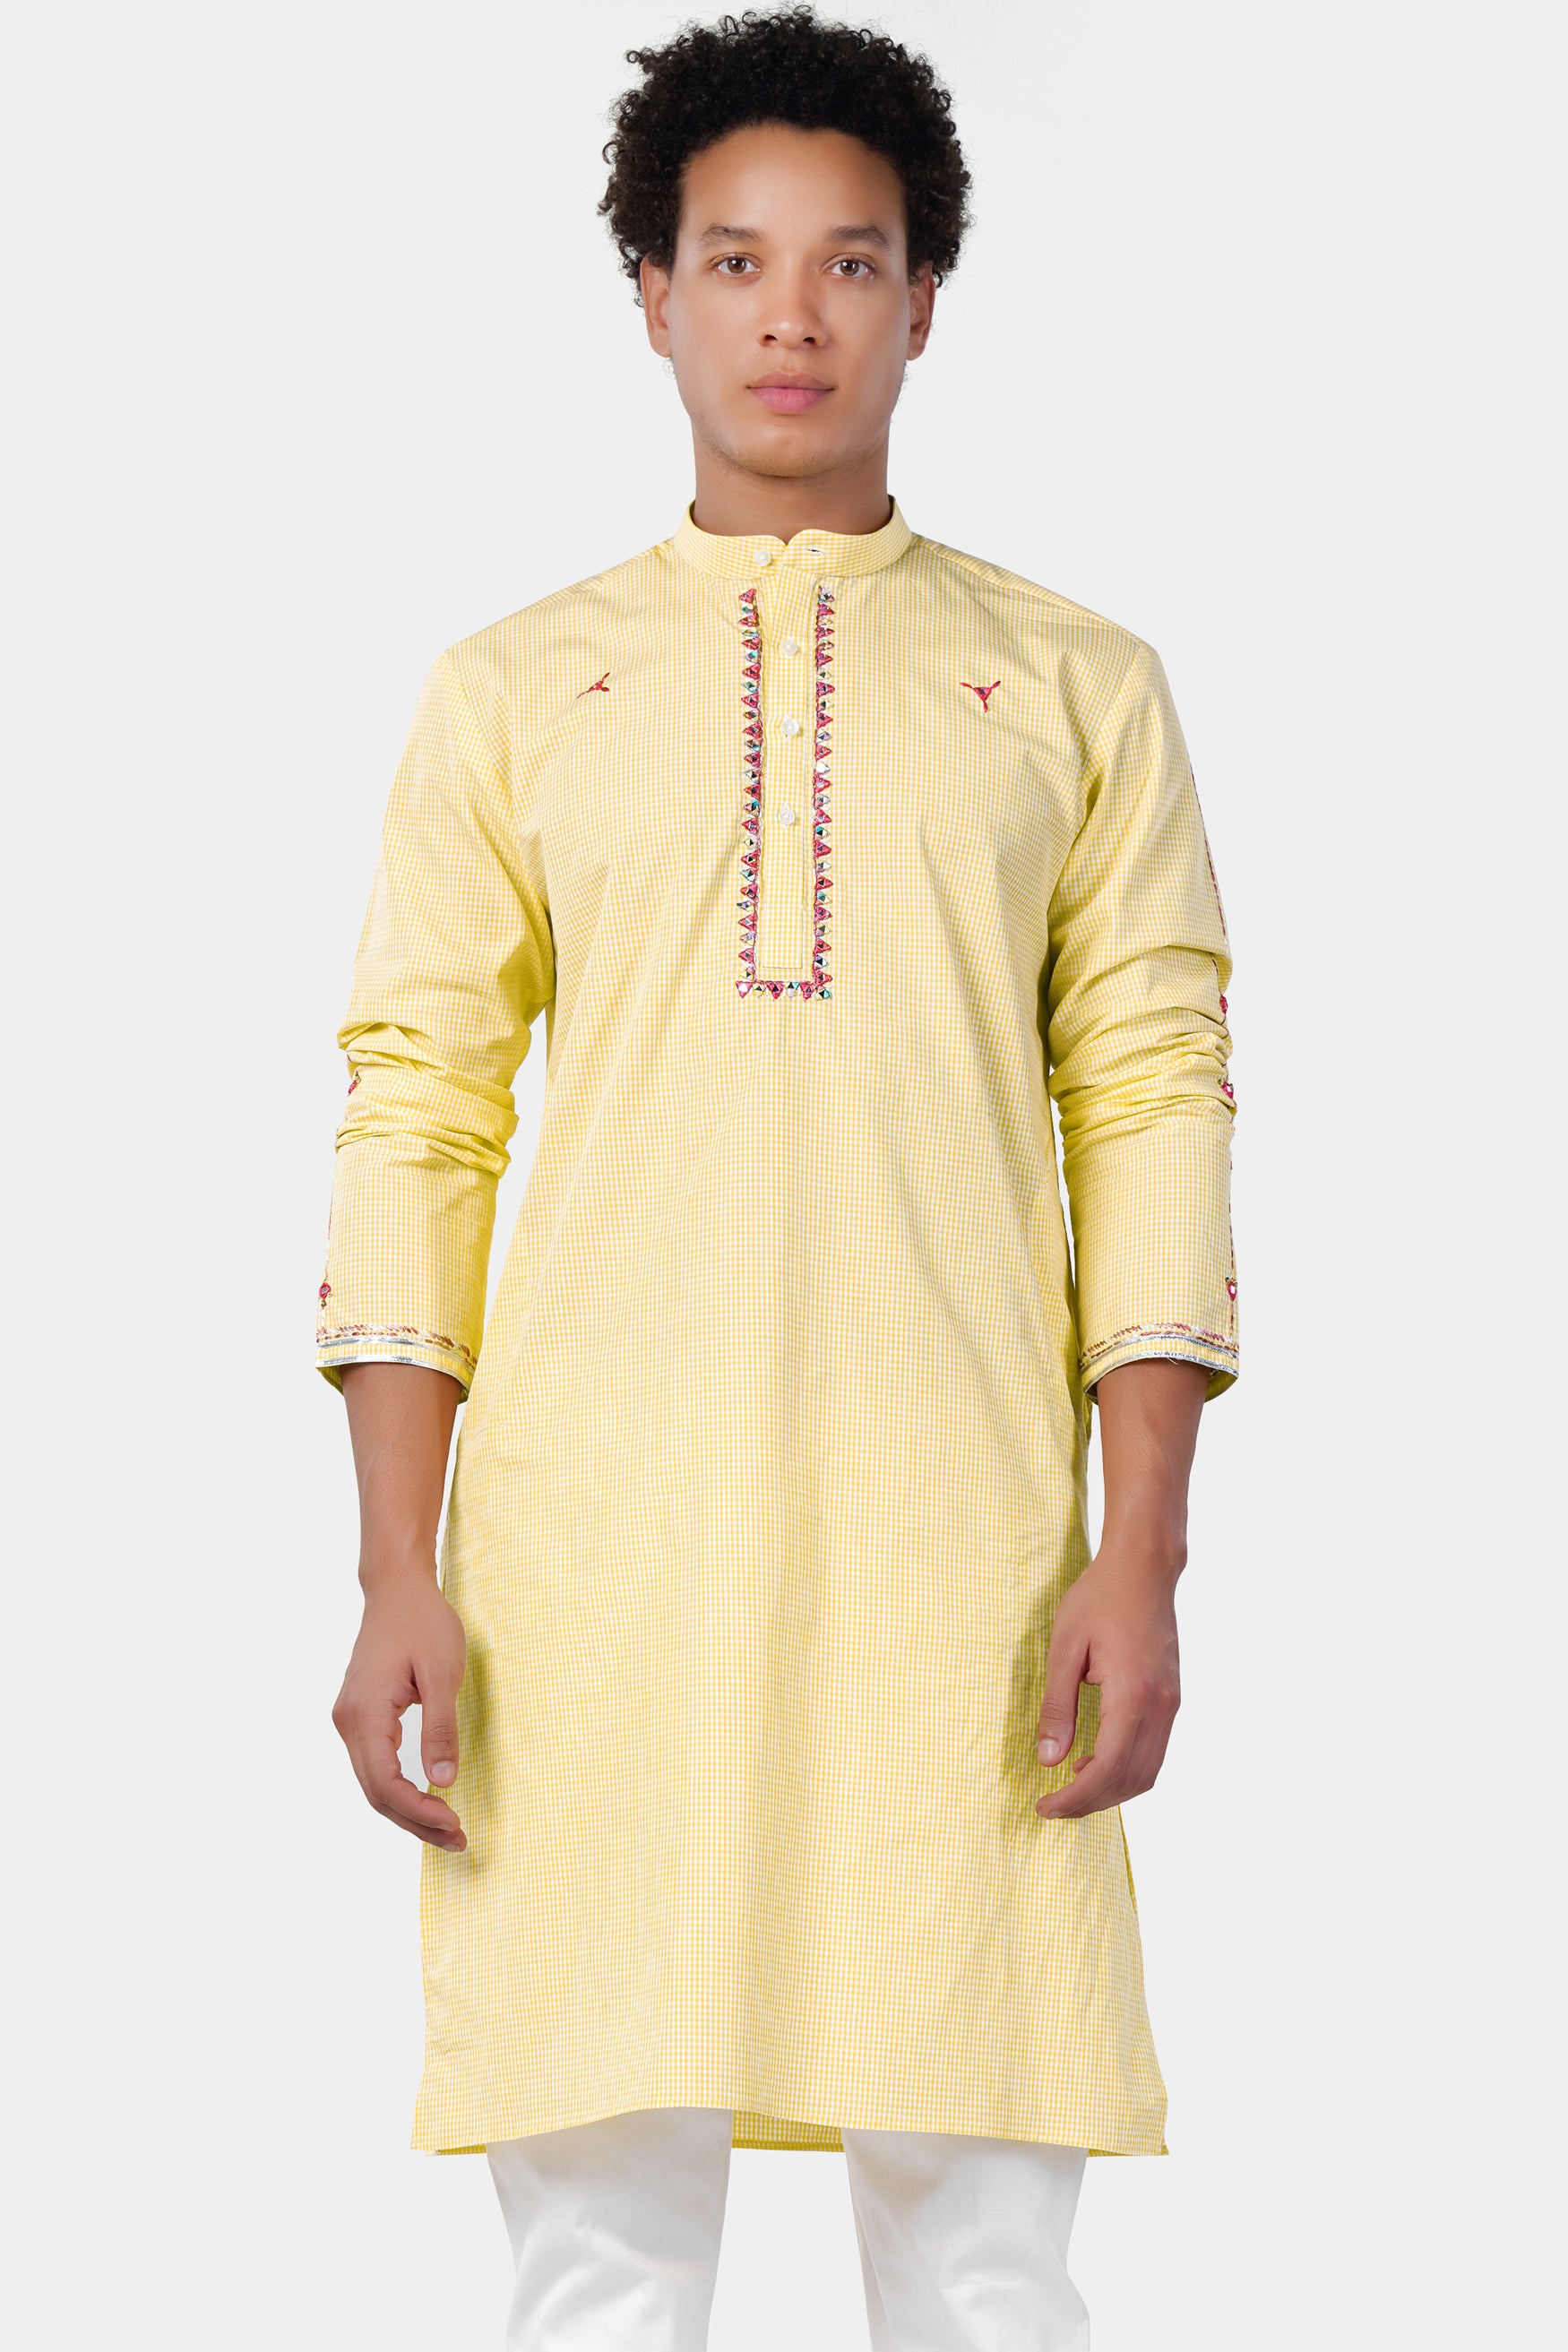 Brulee Yellow and White Gingham Checkered with Thread Embroidered and Mirror Work Premium Cotton Designer Kurta